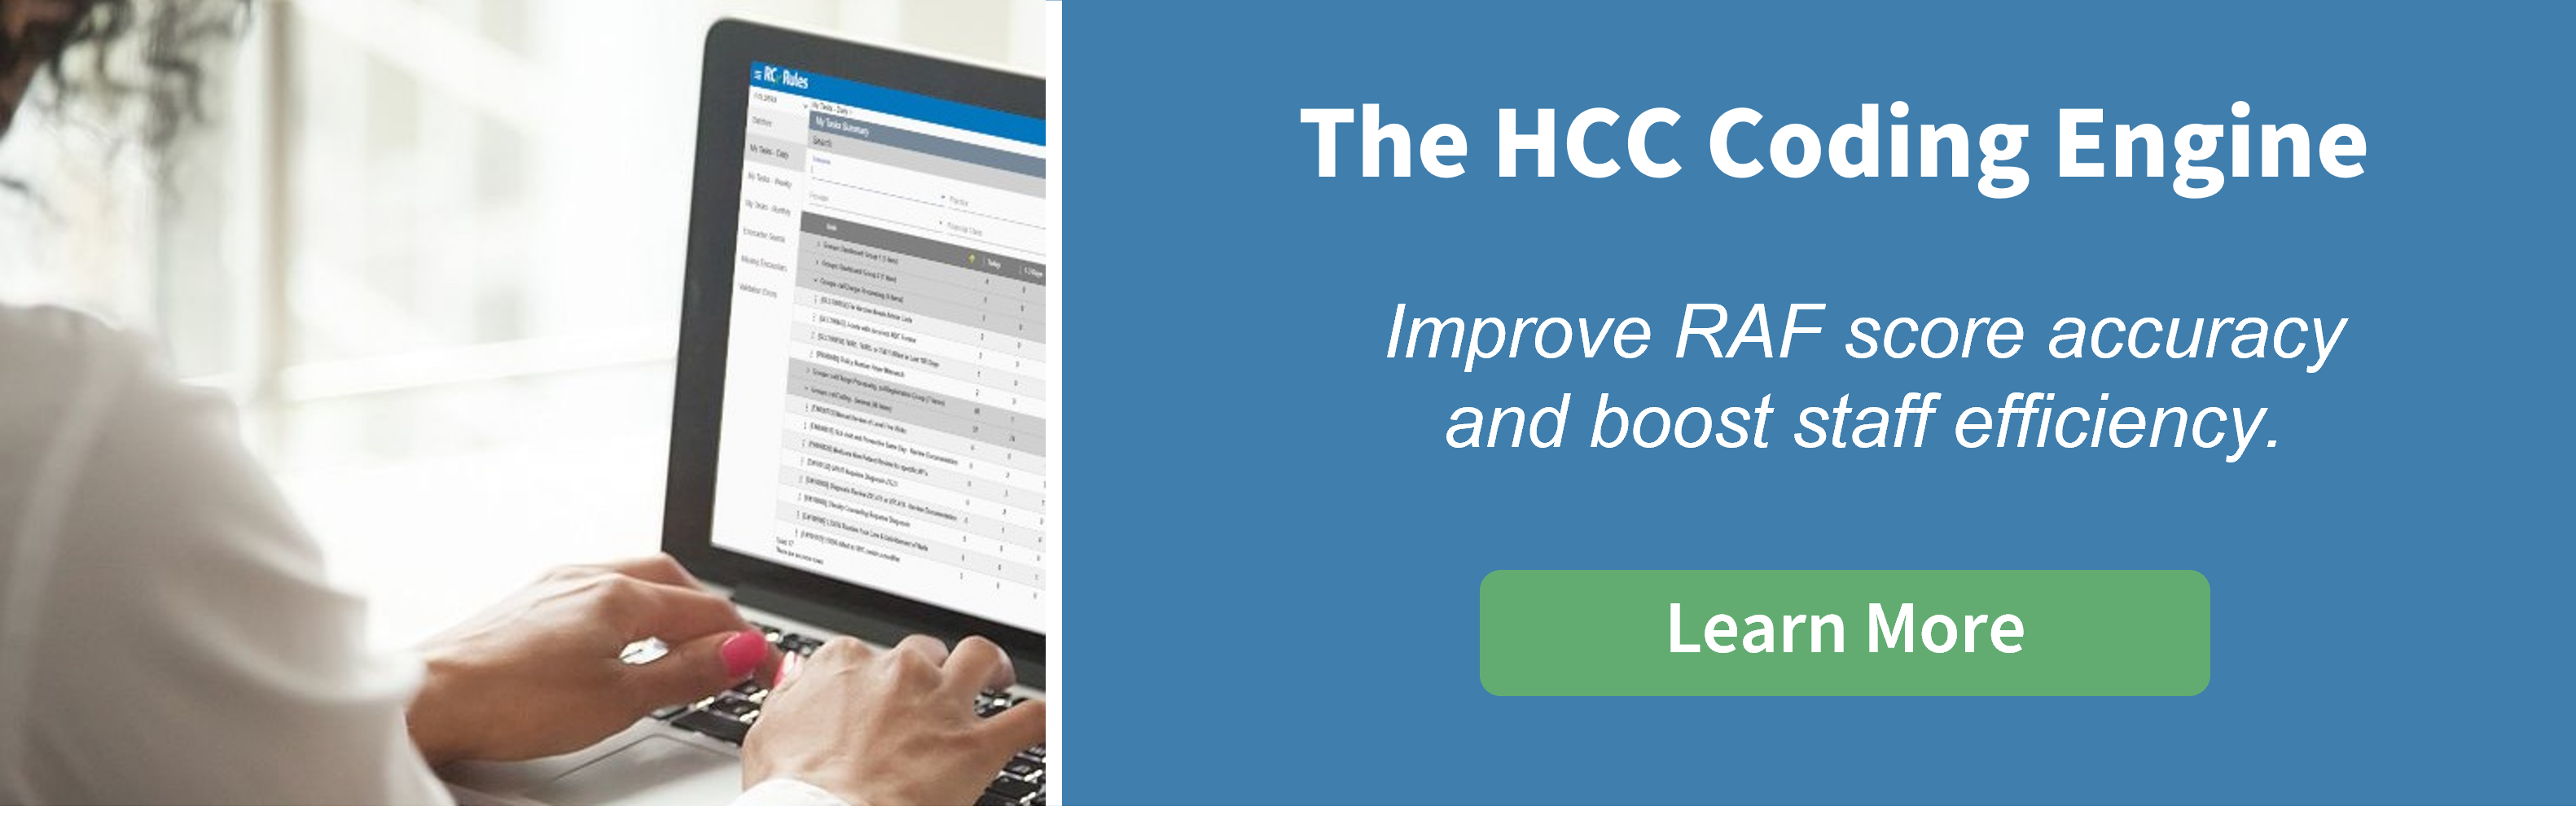 RCxRules Product - Learn More Image CTA - HCC Coding Engine